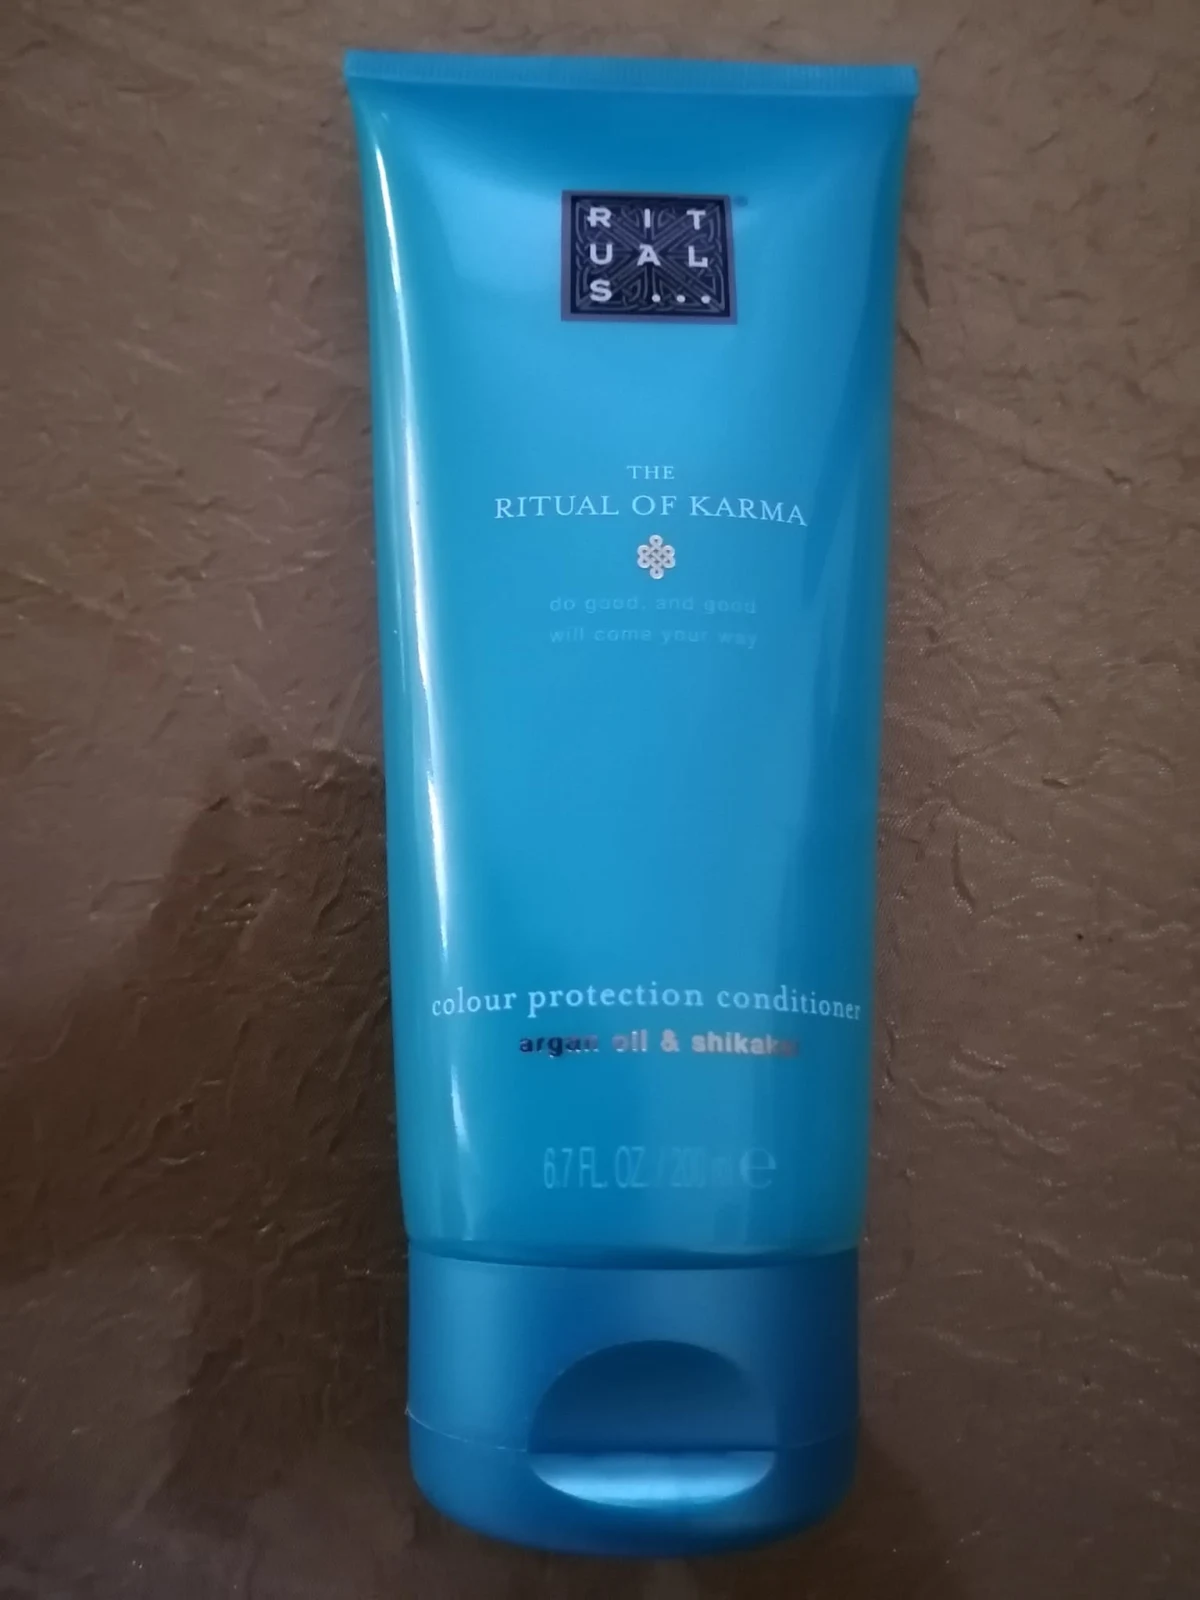 Rituals Cosmetics The Ritual of Karma Conditioner 200ml - review image